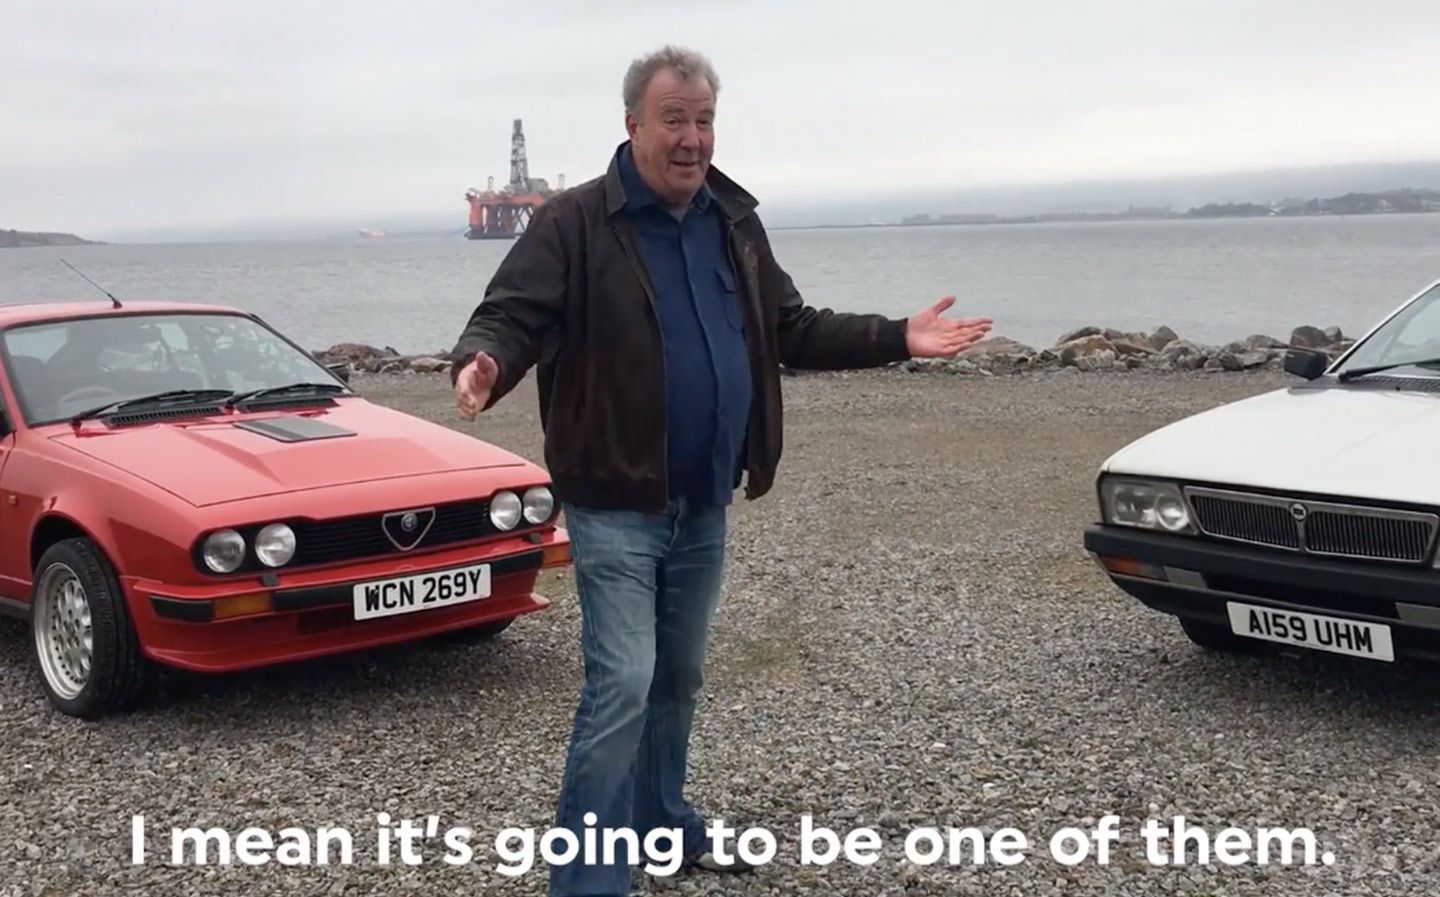 Jeremy Clarkson wants to know which of these classic Italian cars will break down first